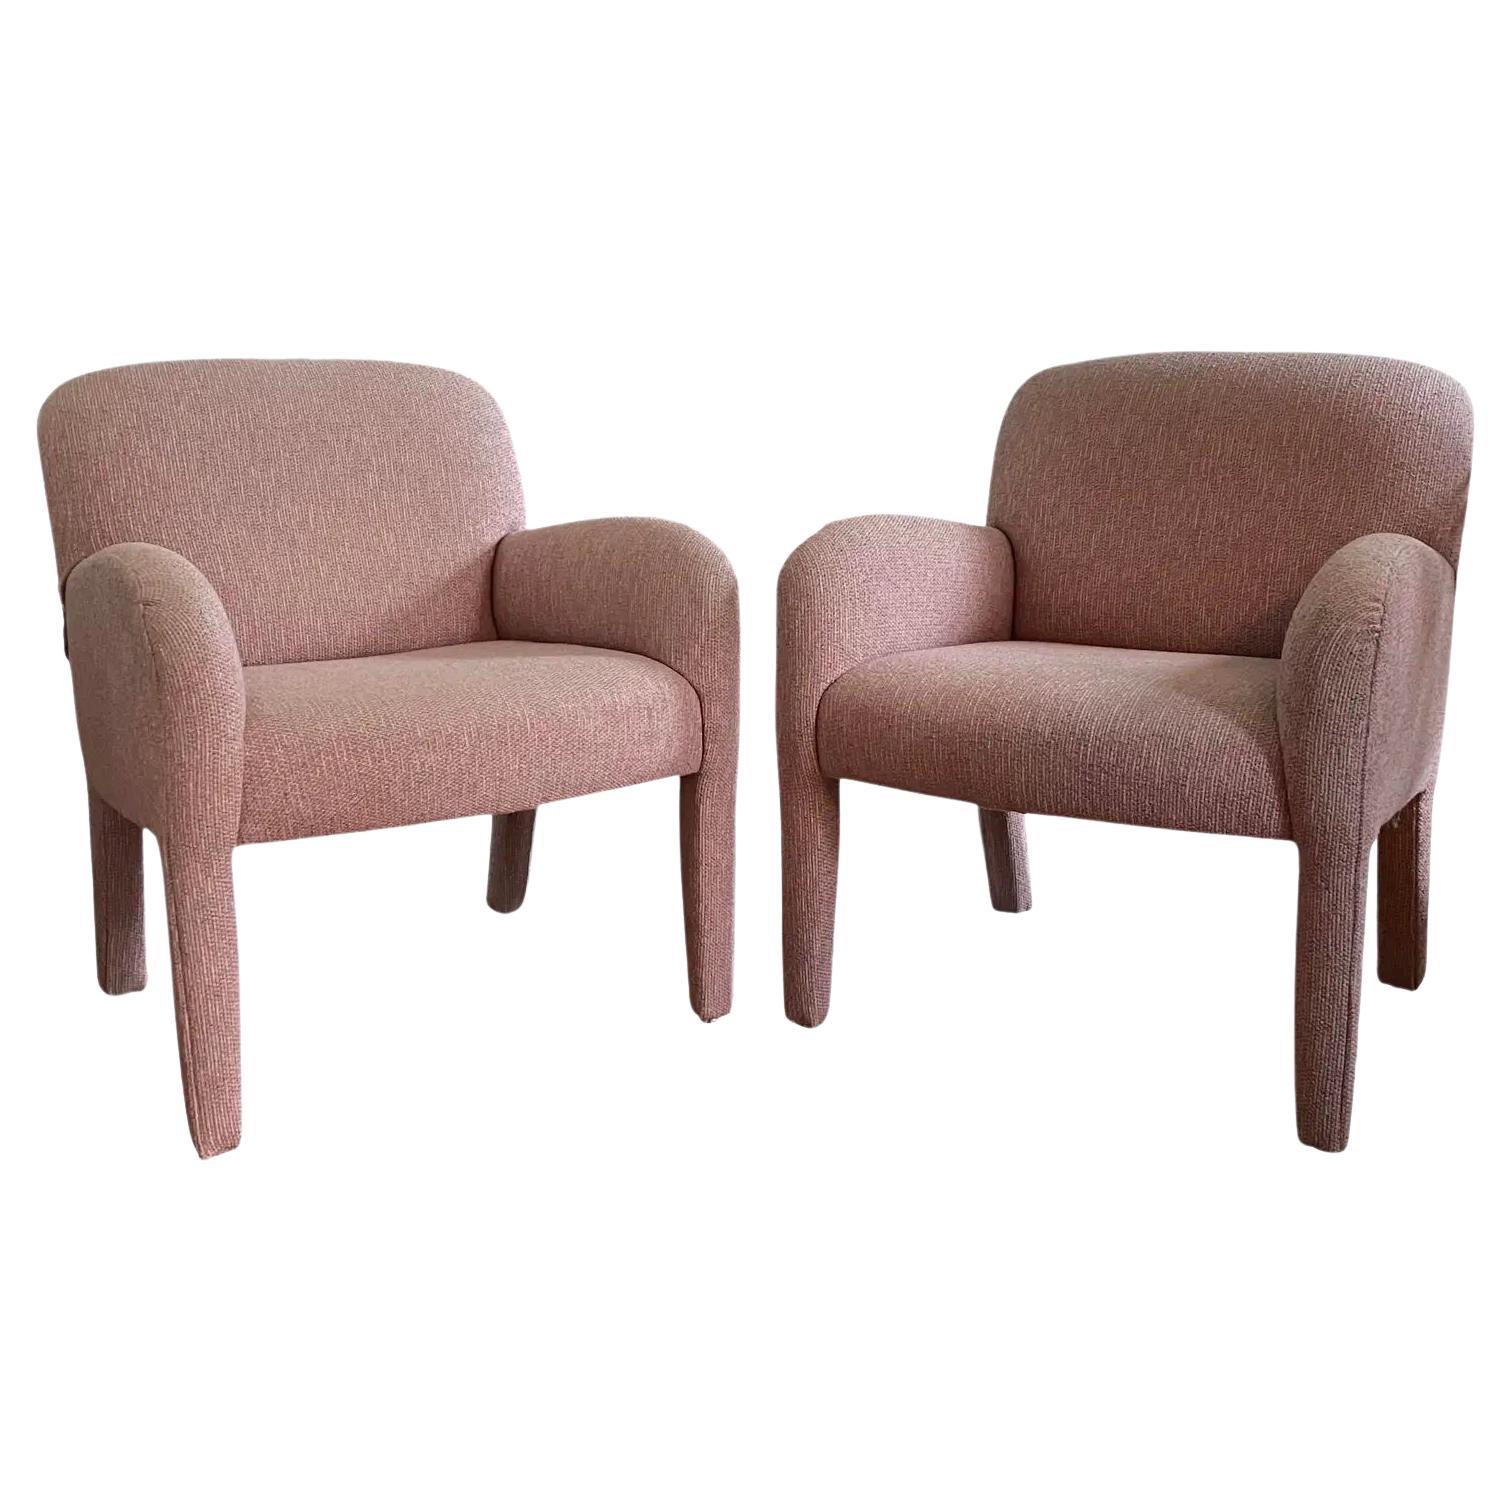 Preview Furniture Art Deco Revival Chairs